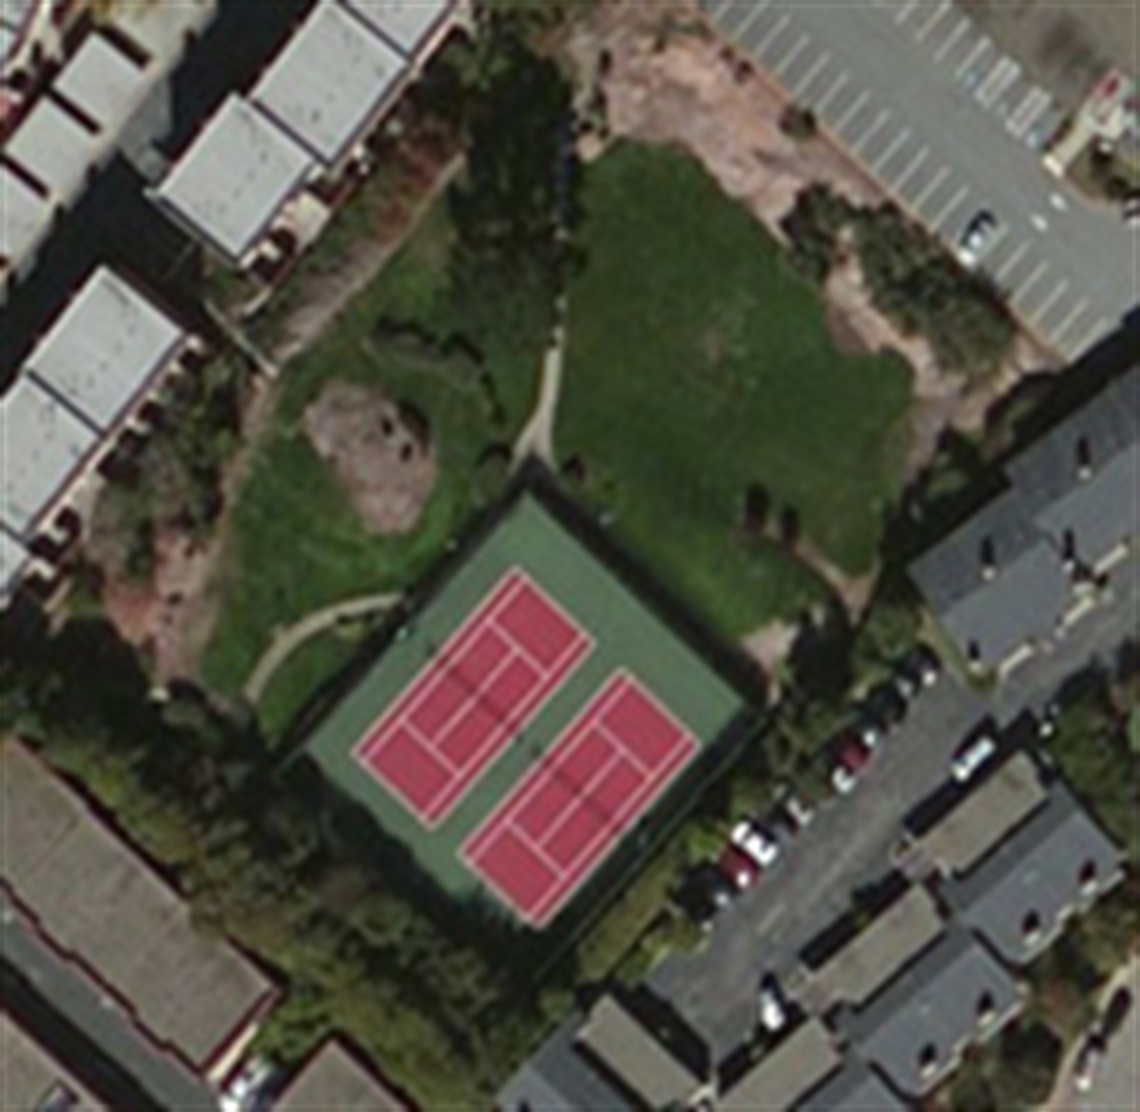 Stonegate tennis courts